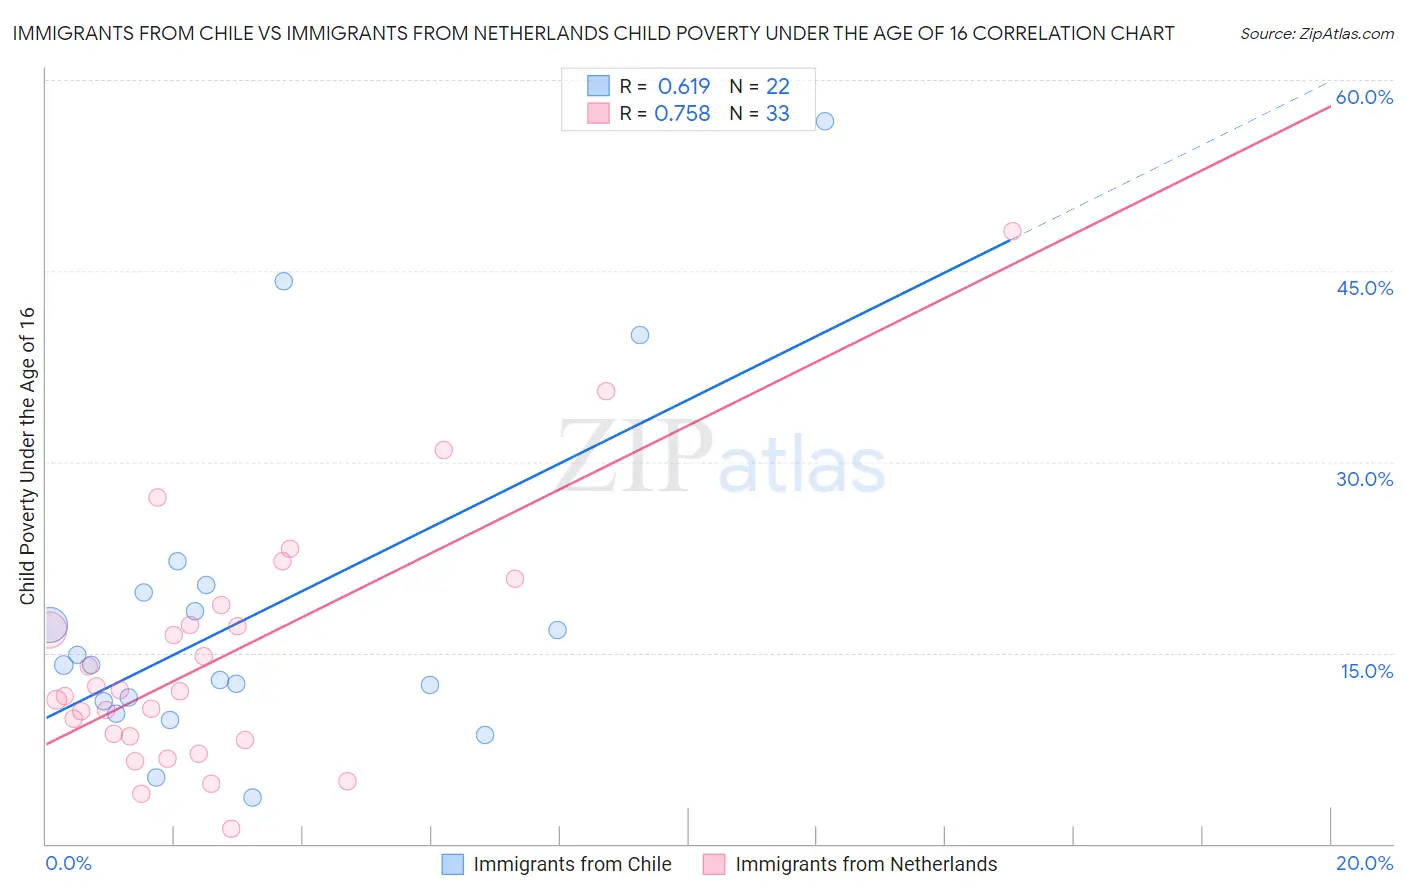 Immigrants from Chile vs Immigrants from Netherlands Child Poverty Under the Age of 16